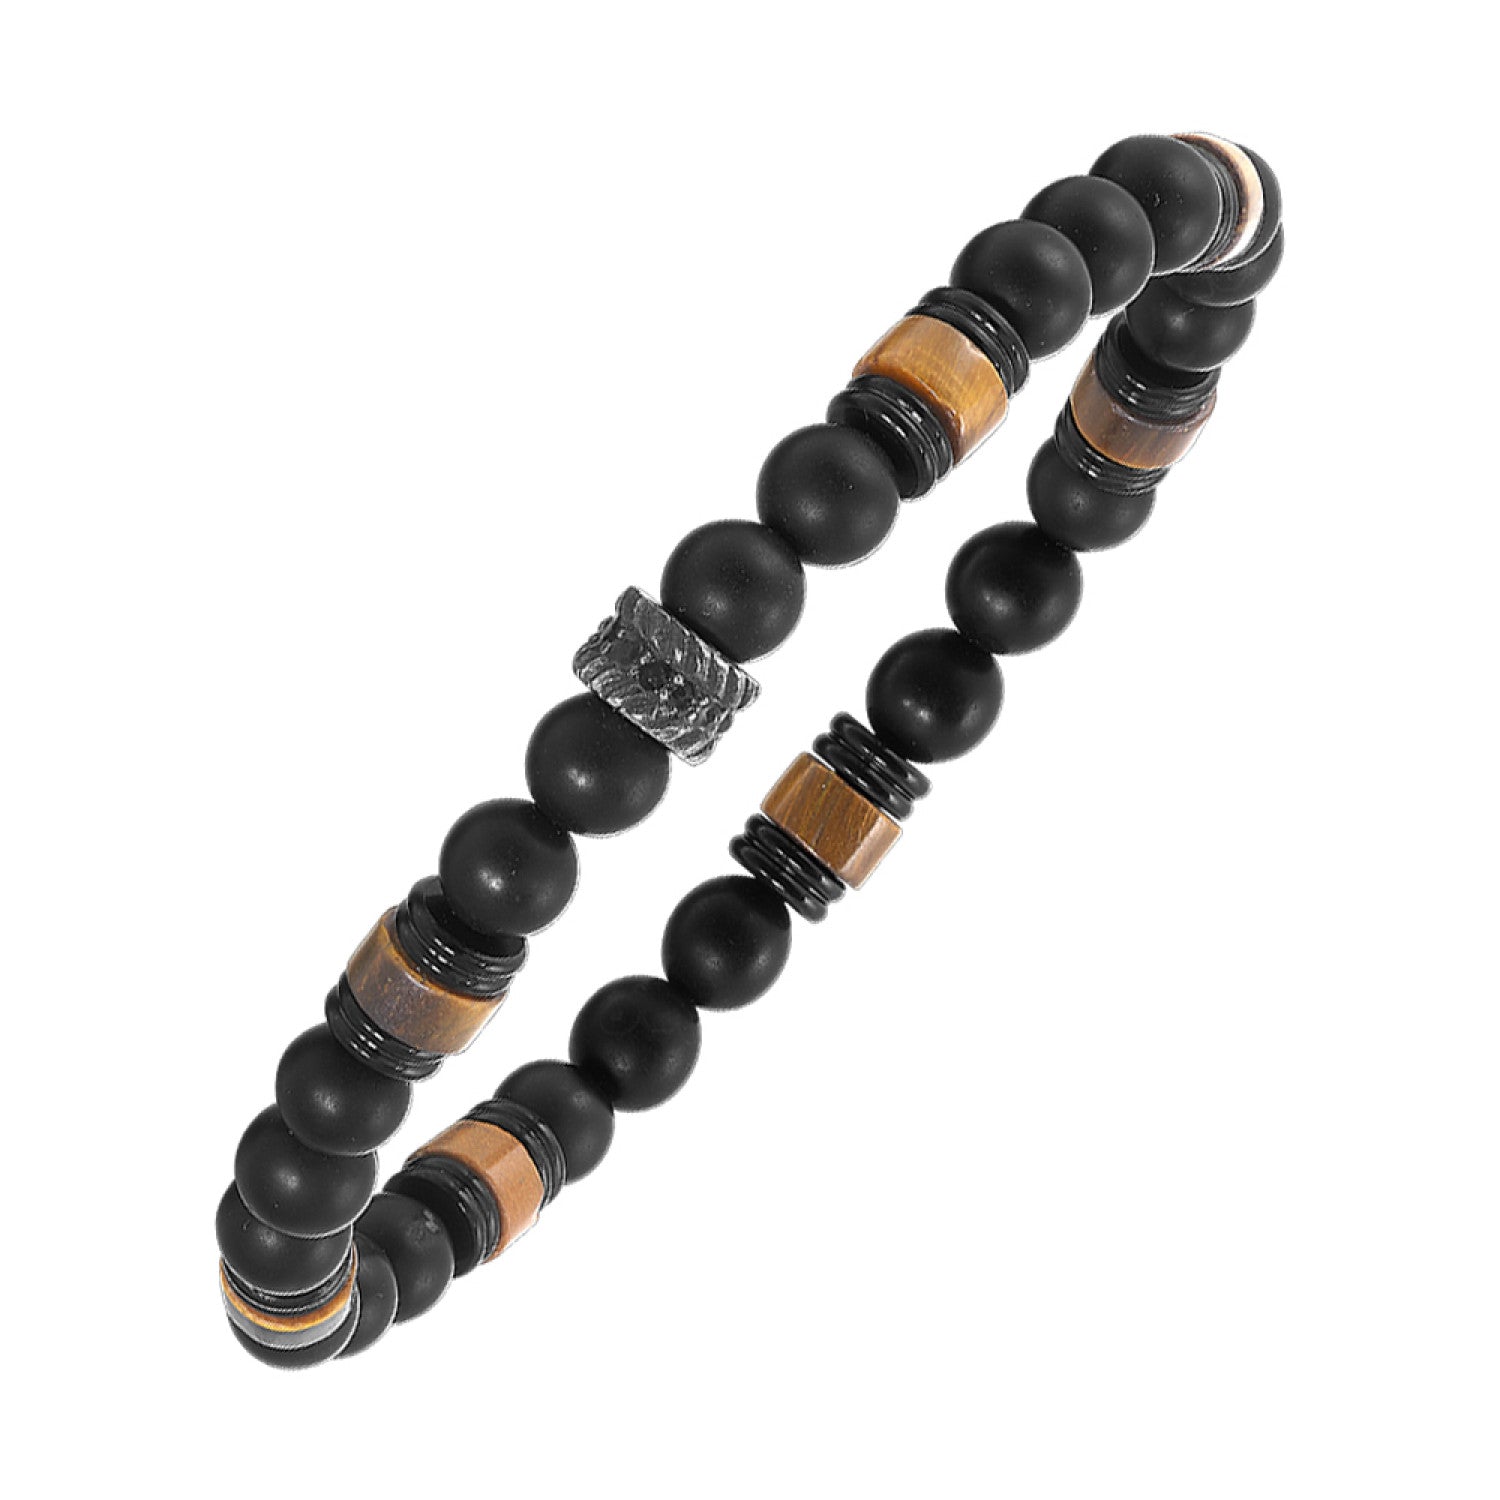 Steel Bracelet with Beads and Wood Accents